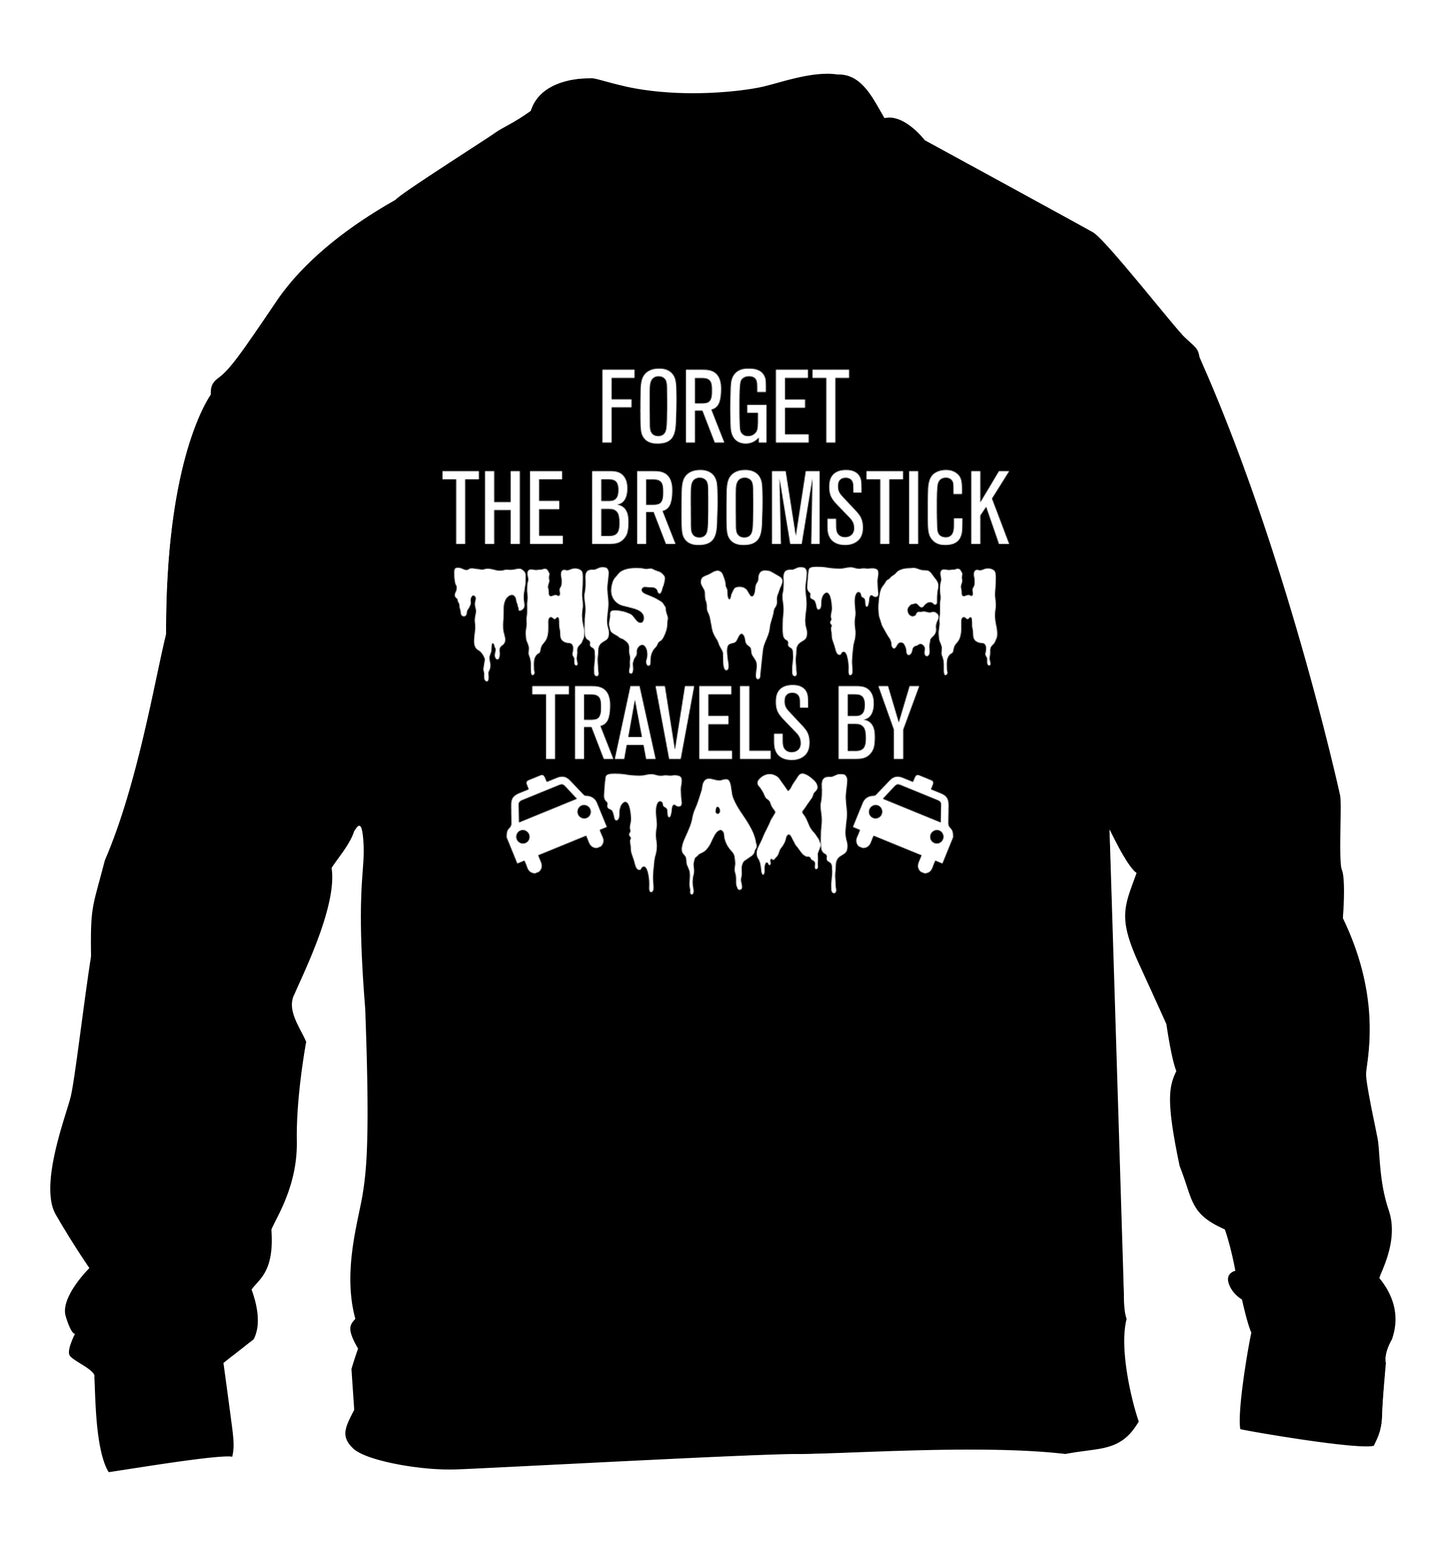 Forget the broomstick this witch travels by taxi children's black sweater 12-14 Years